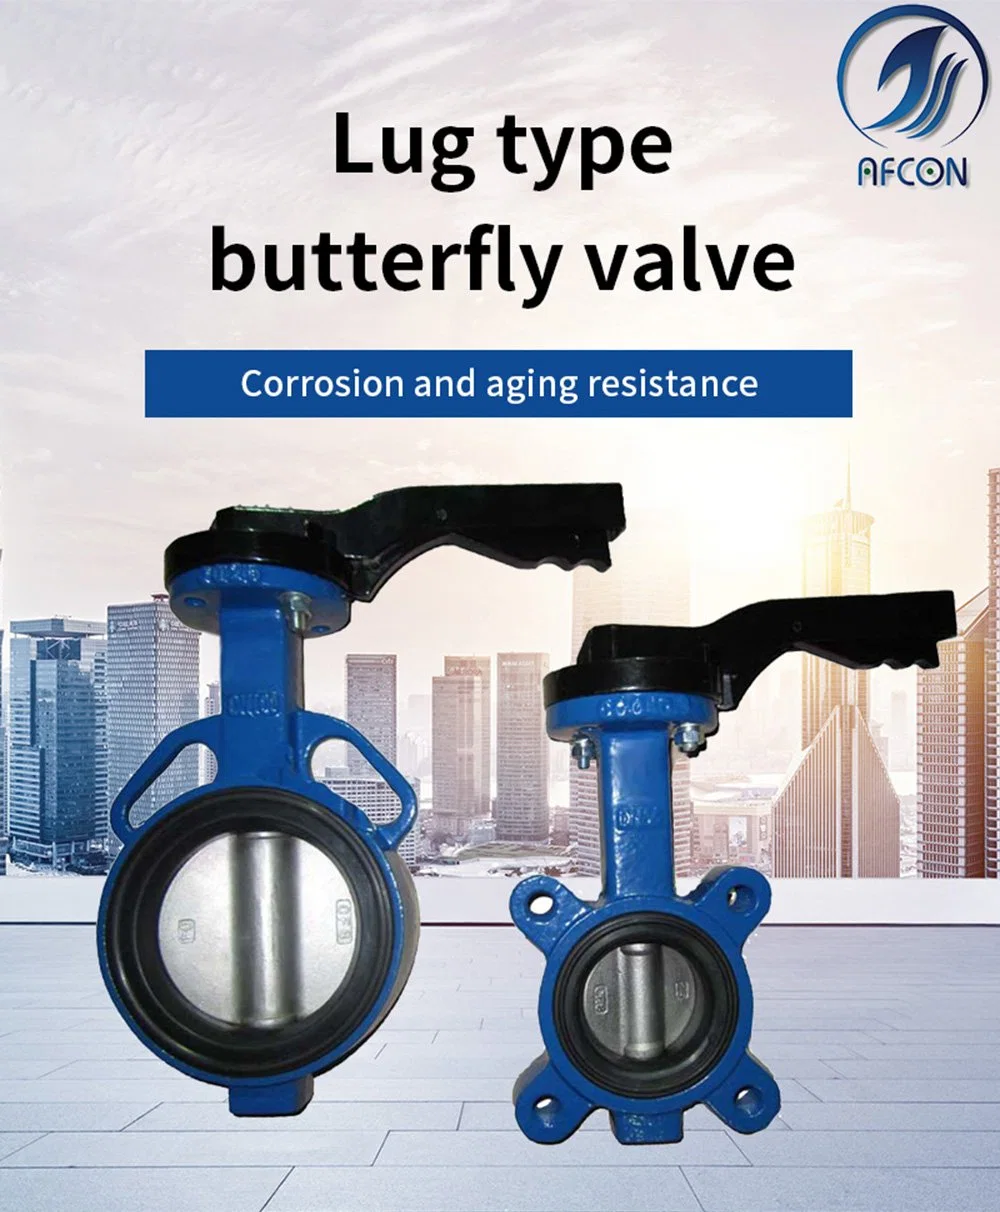 Actuated Motorized Automatic Control Cast Iron Ductile Iron Electric Lt Lug Type Wafer Butterfly Valve